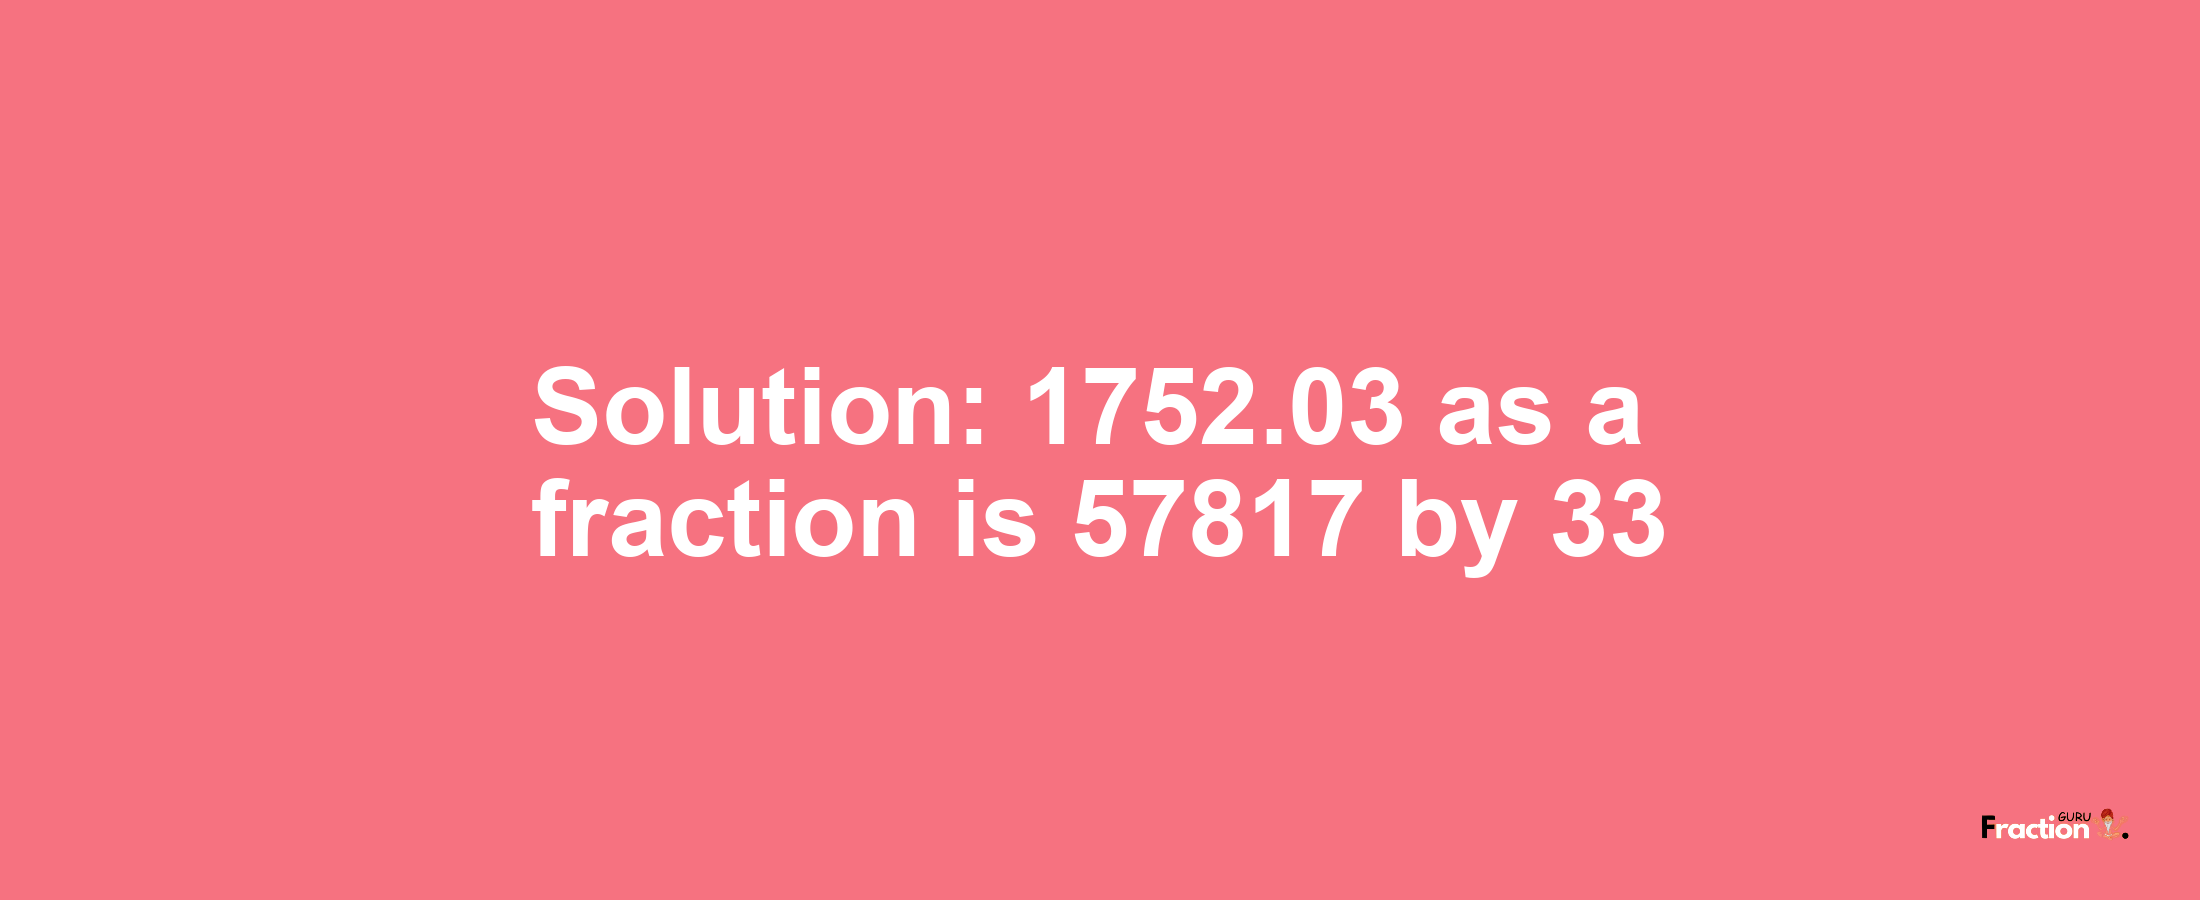 Solution:1752.03 as a fraction is 57817/33